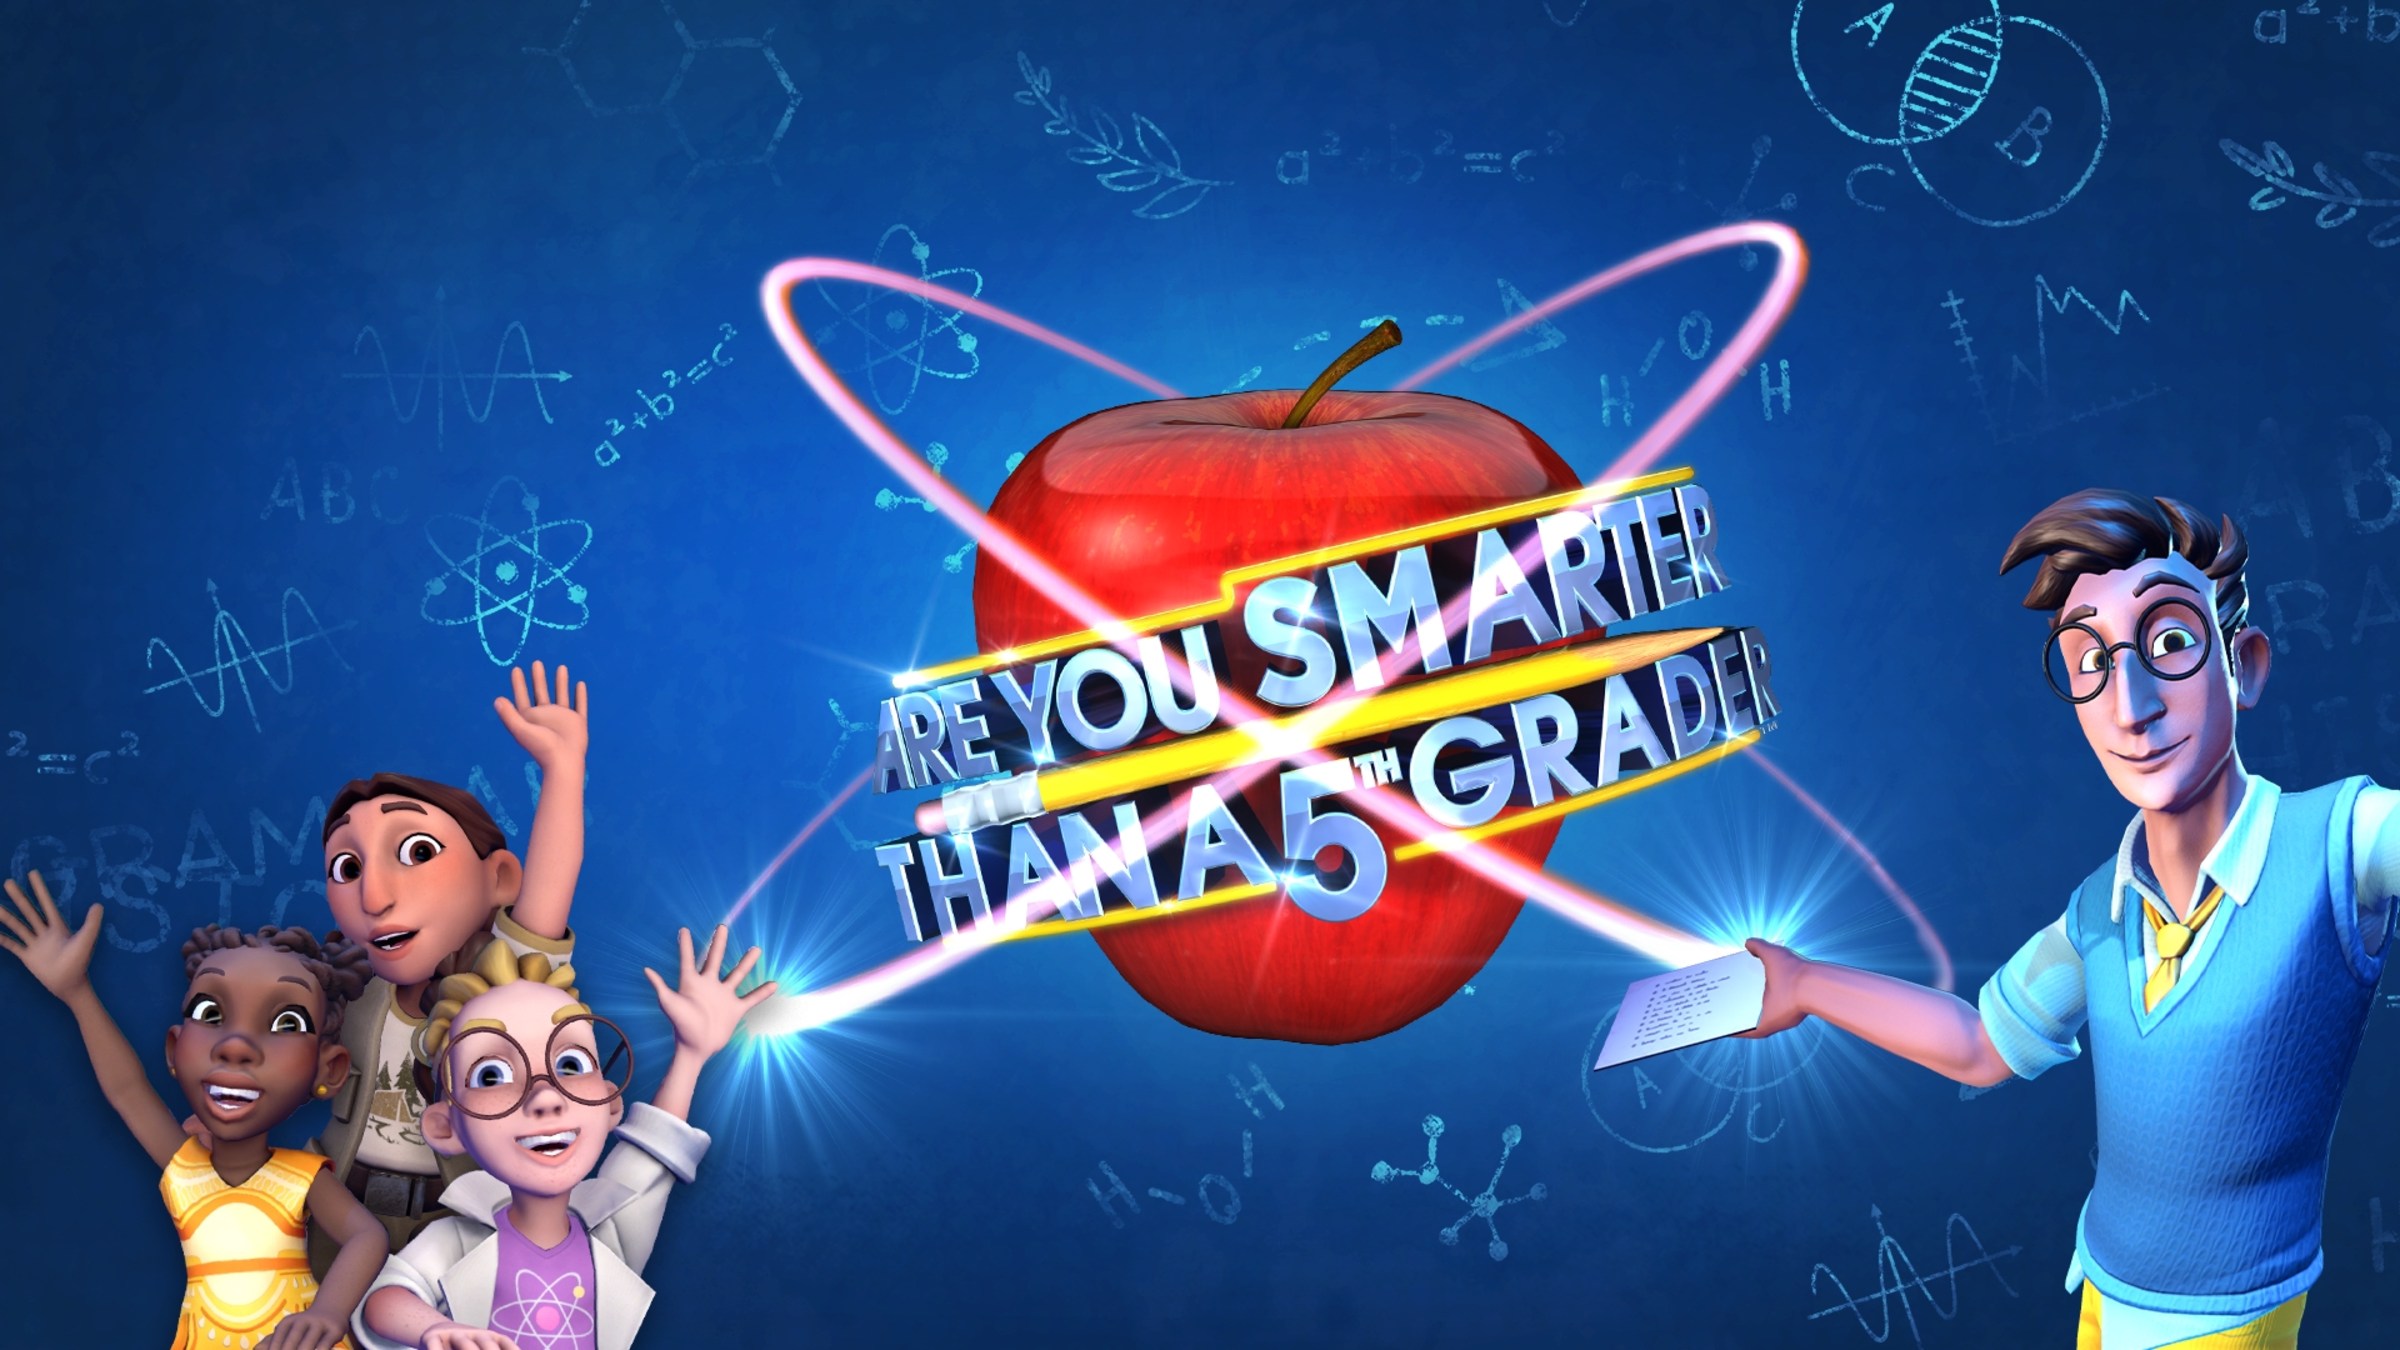 Are You Smarter than a 5th Grader? for Nintendo Switch Nintendo